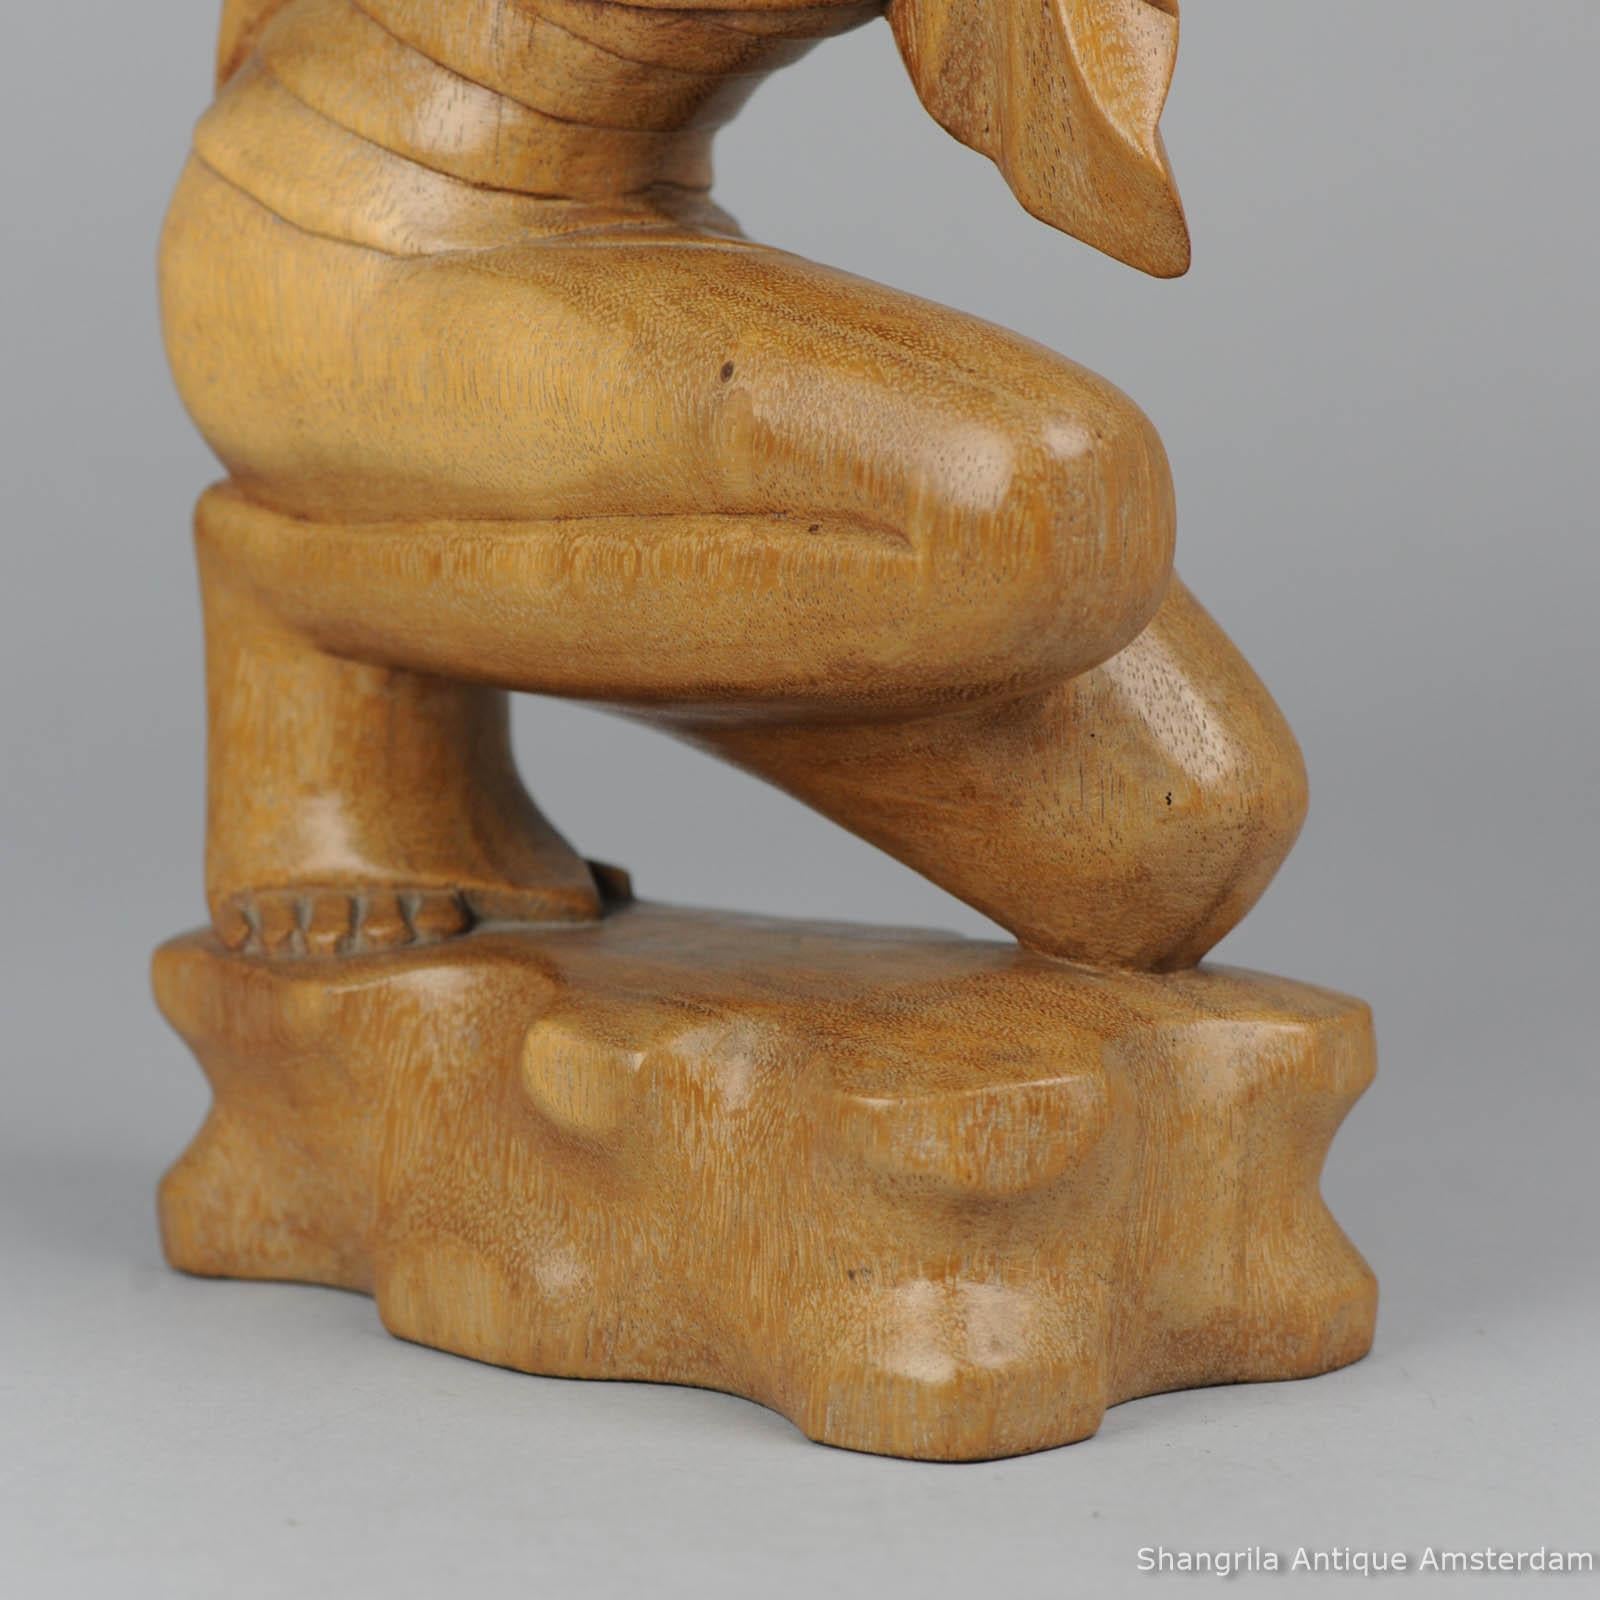 wood carving woman figure